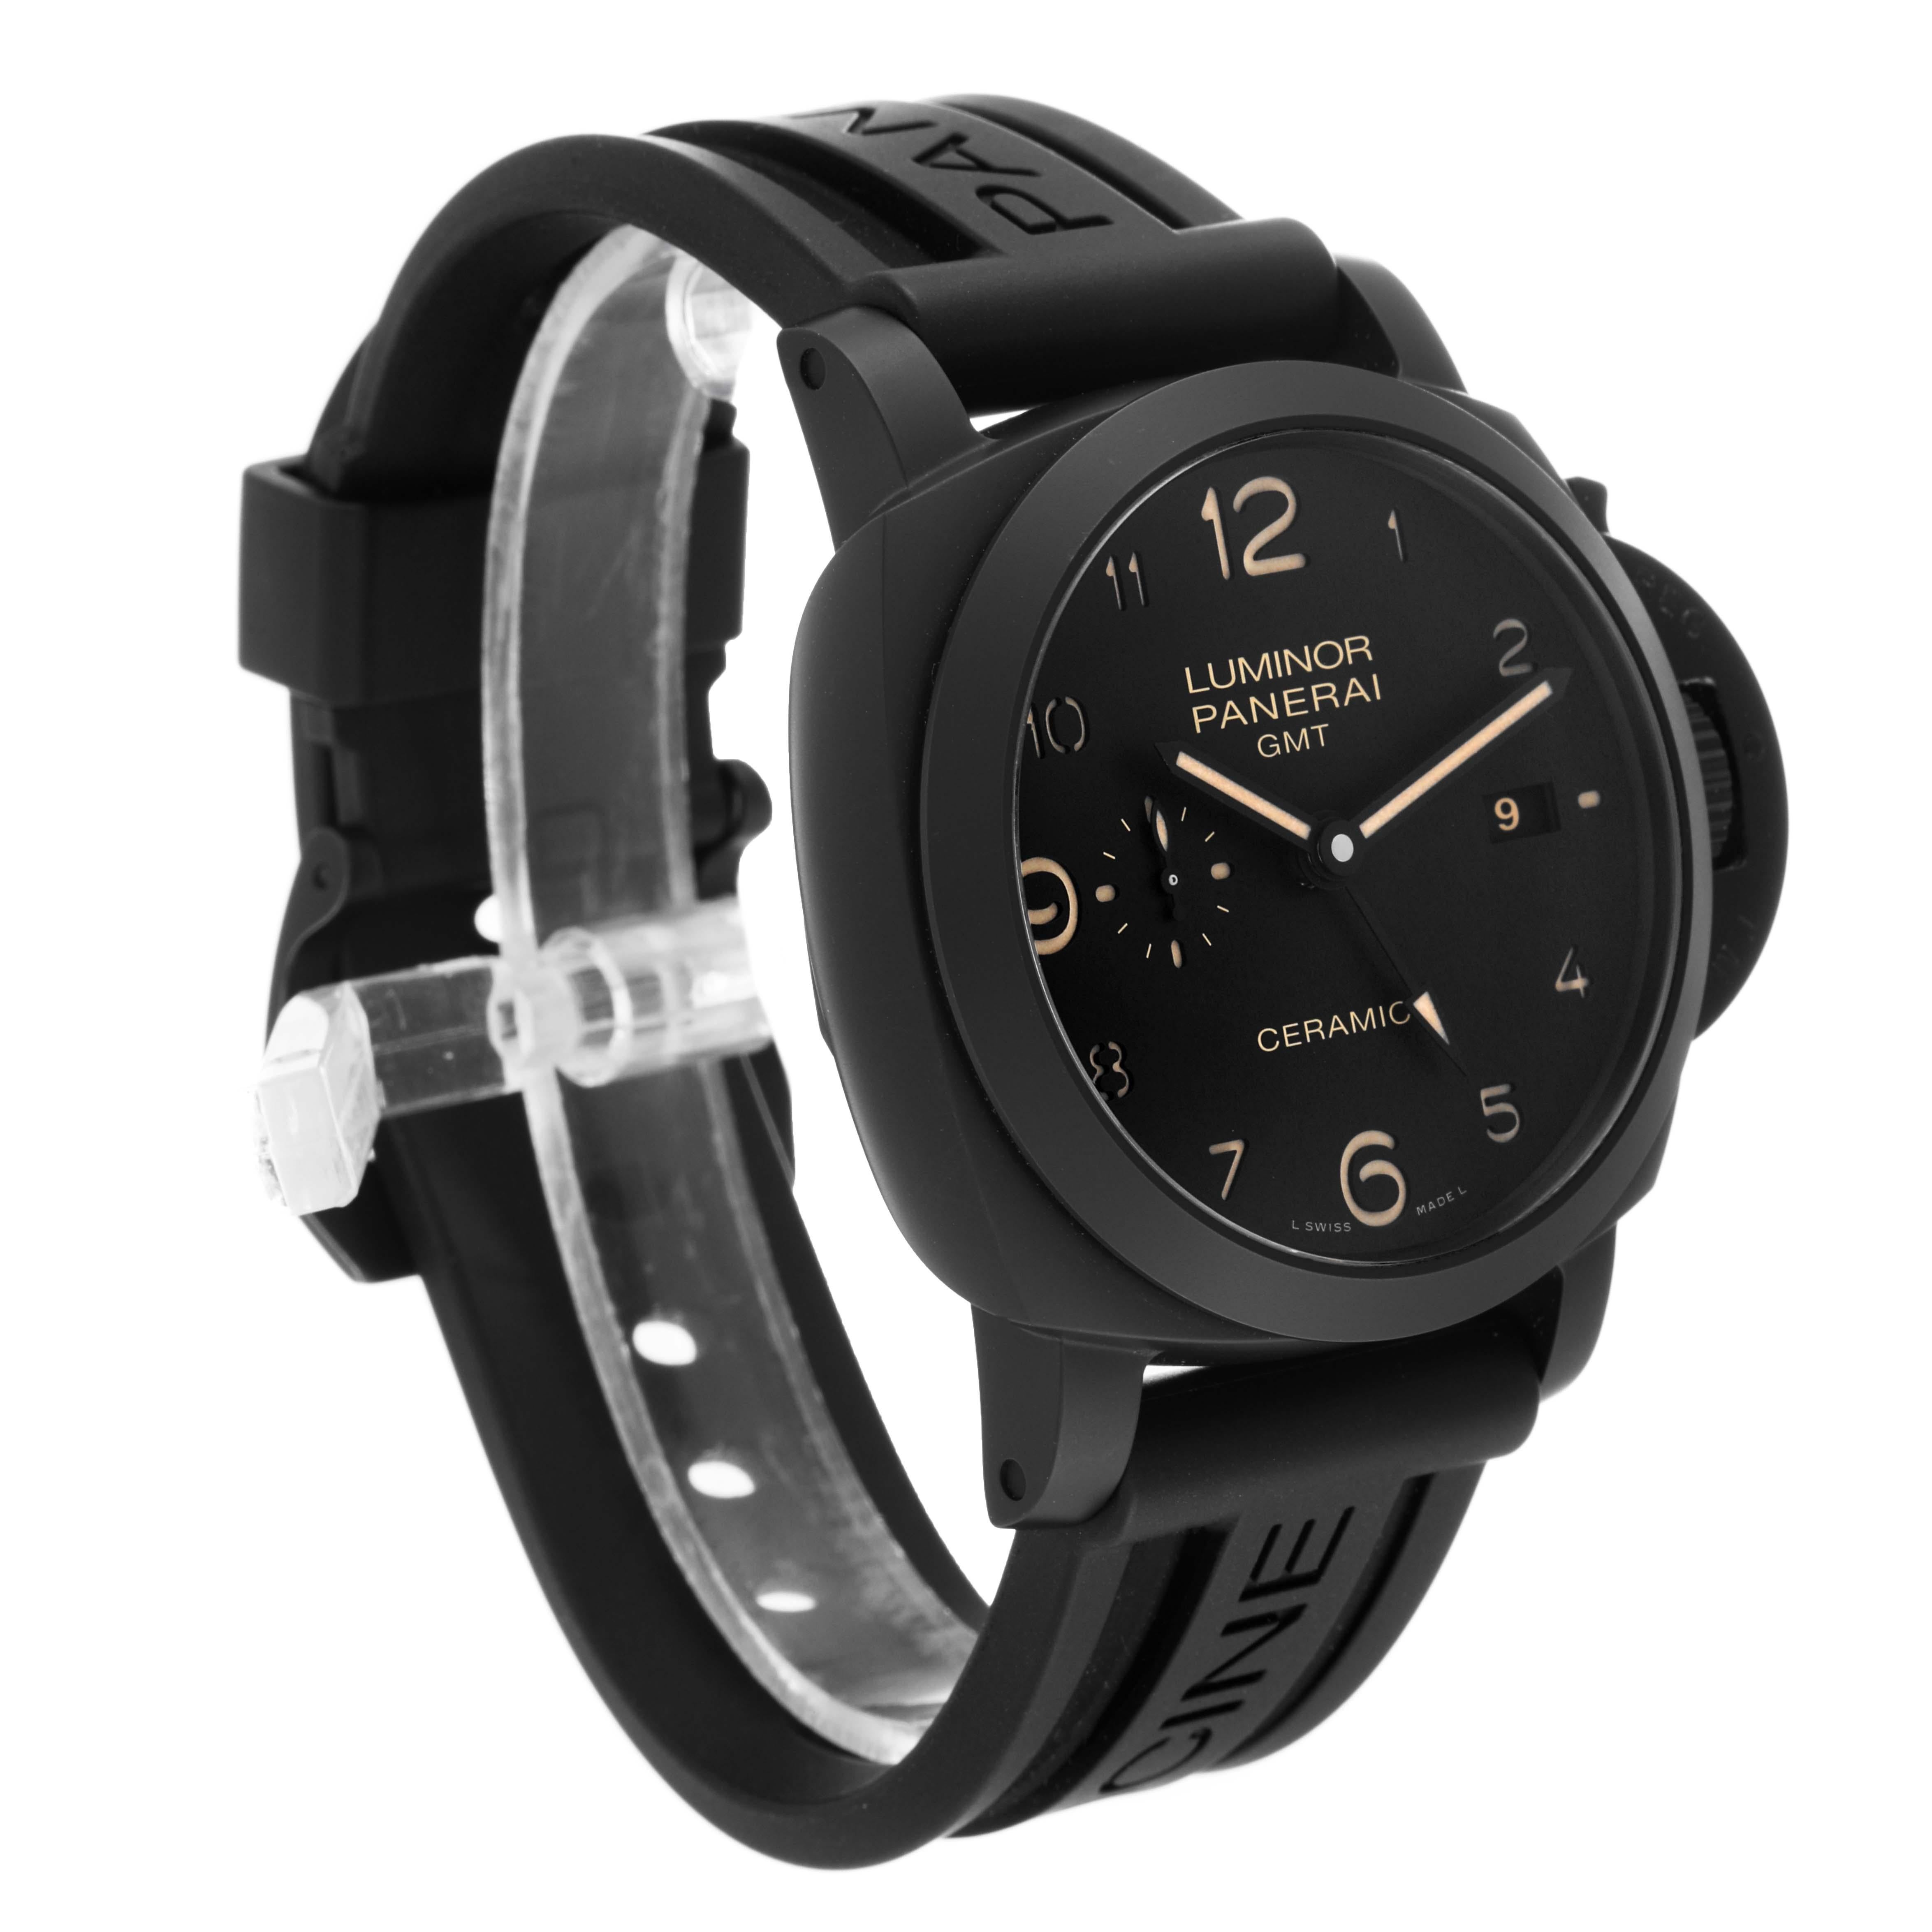 Panerai Luminor 1950 3 Days GMT Ceramic Limited Edition Mens Watch PAM00441 For Sale 7